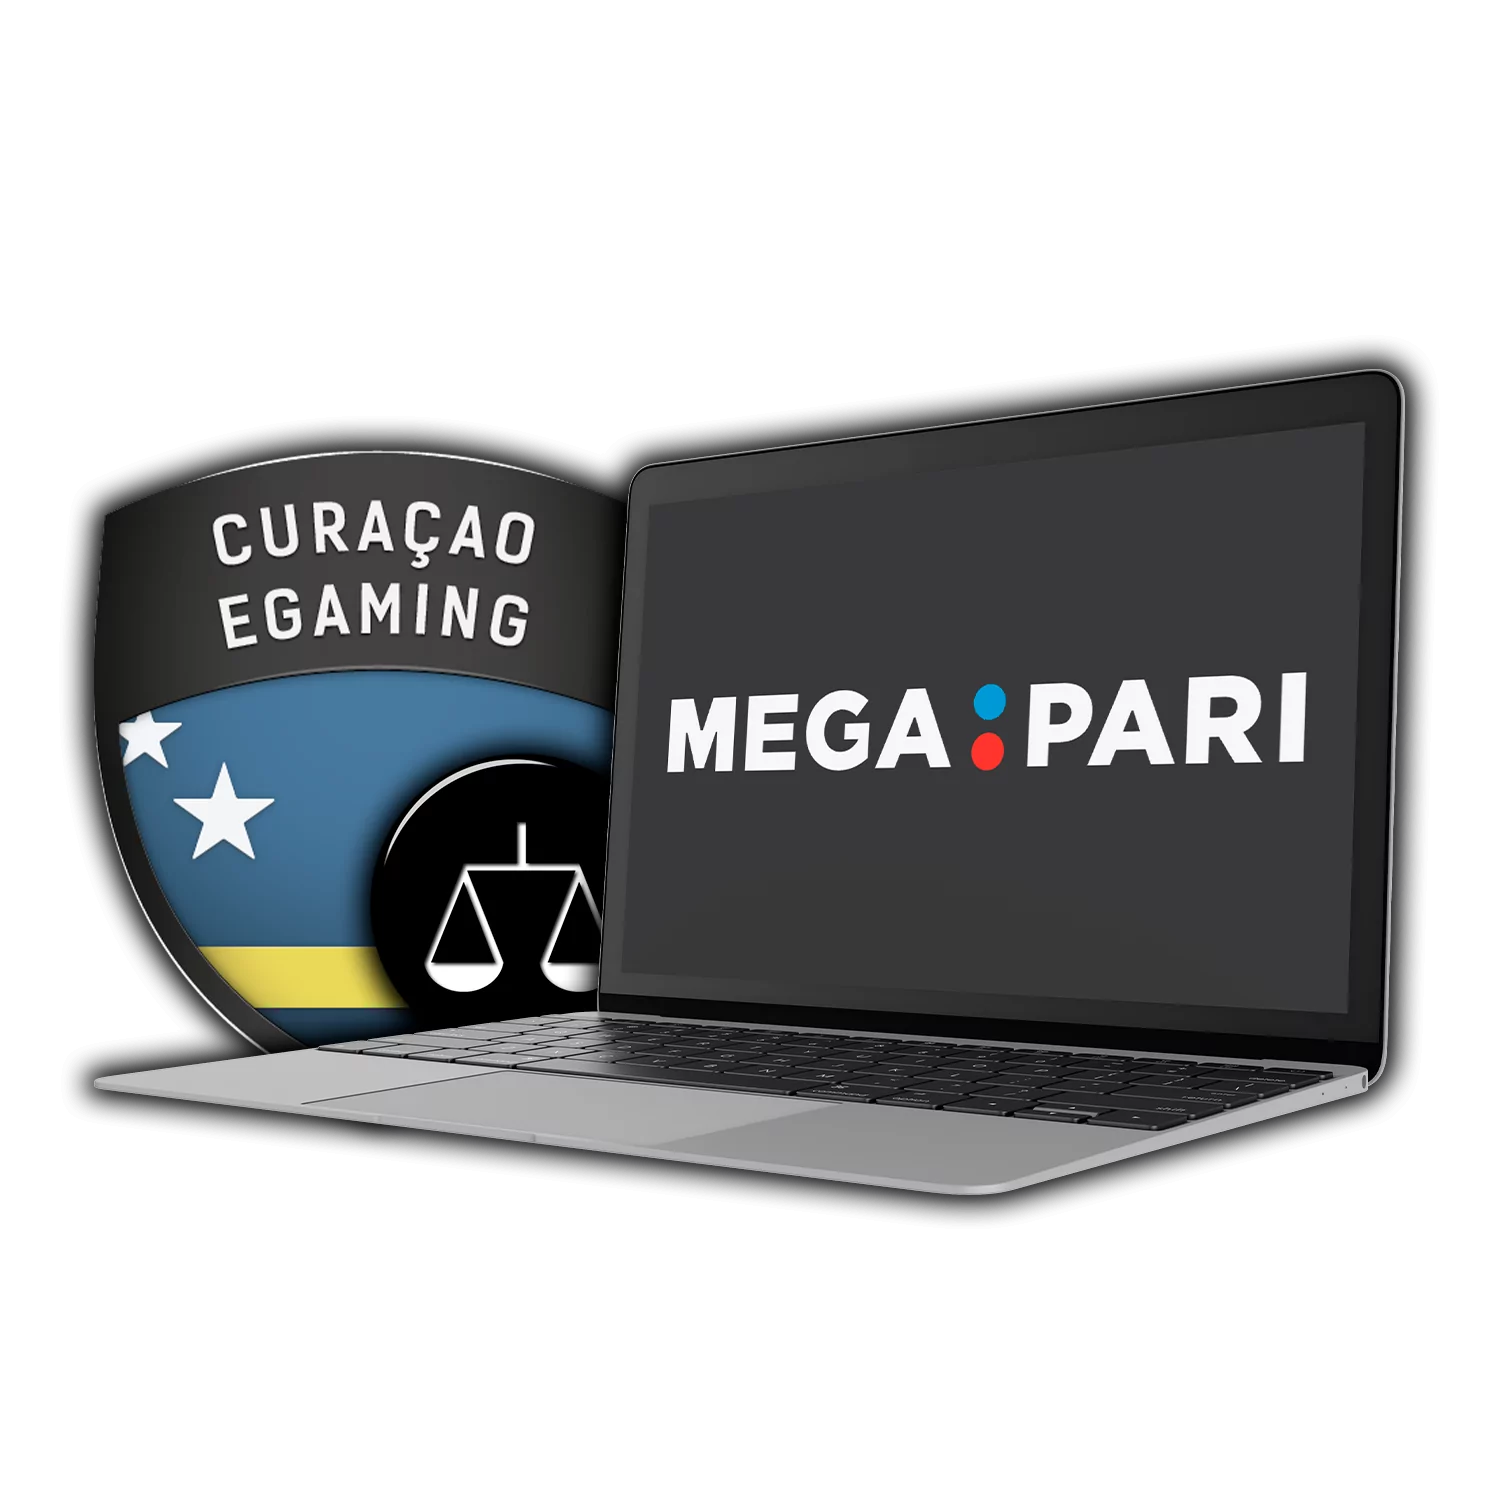 Mega Pari is properly licensed by Curacao.